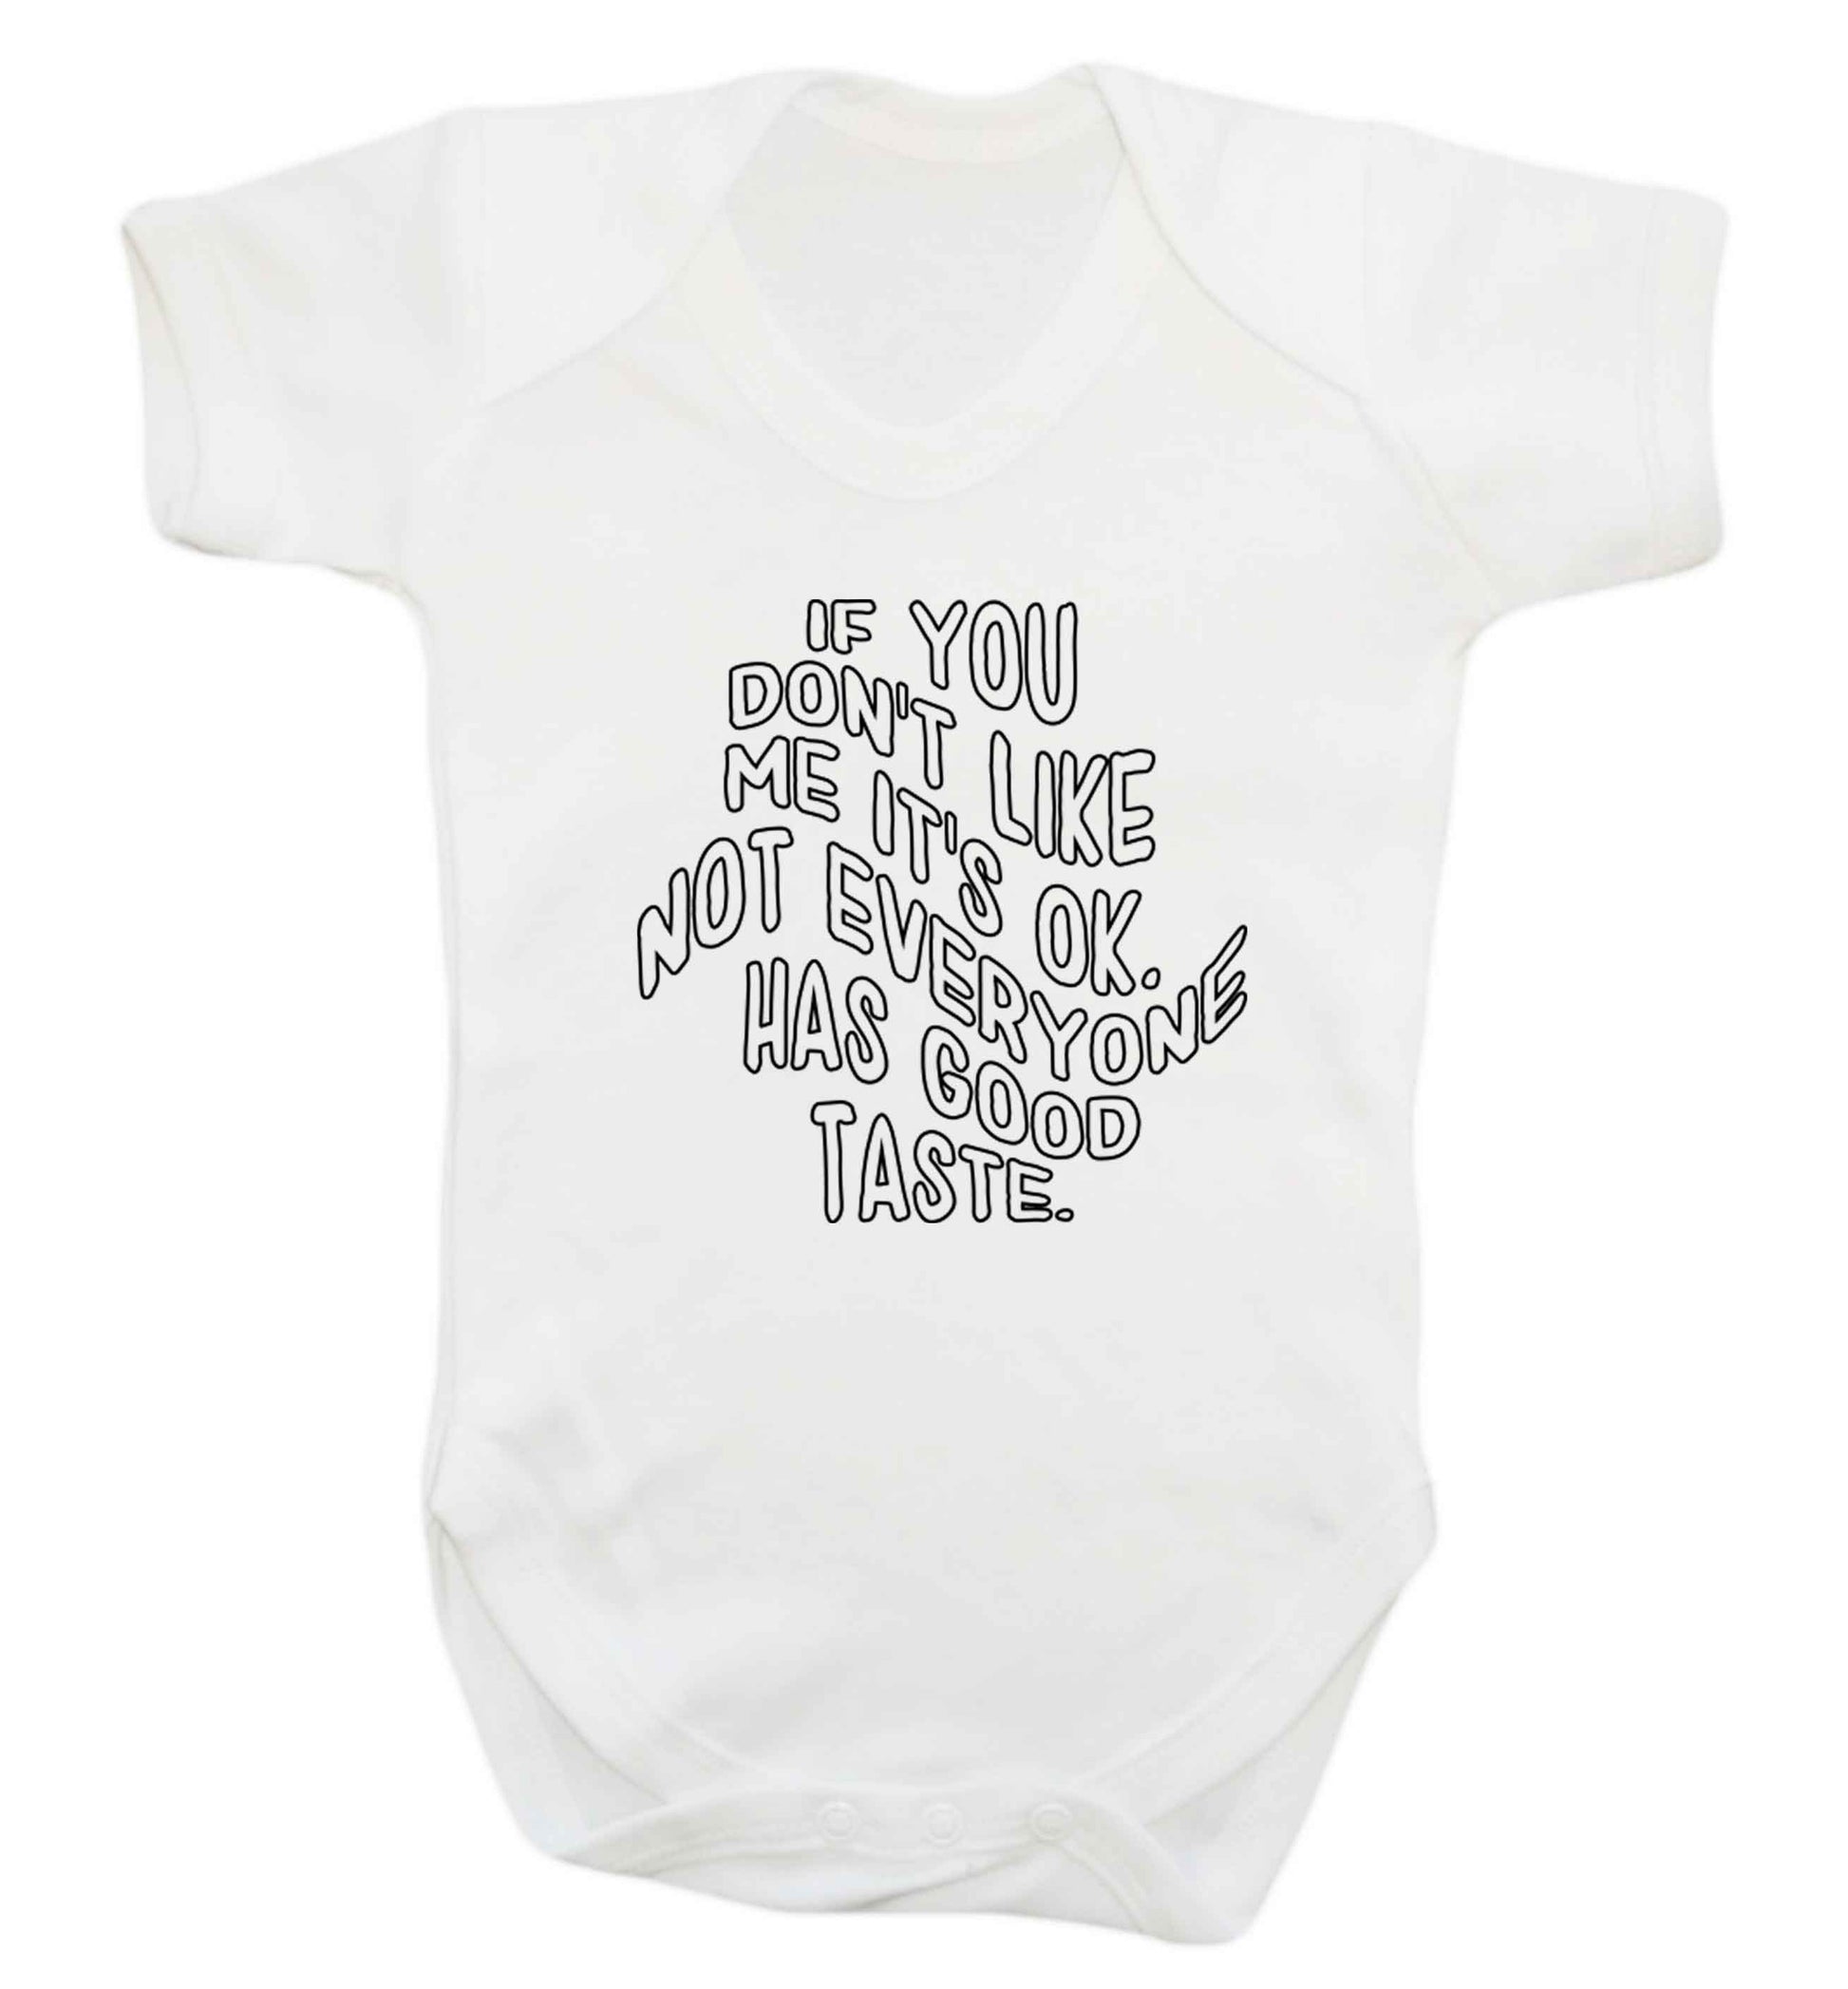 If you don't like me it's ok not everyone has good taste baby vest white 18-24 months